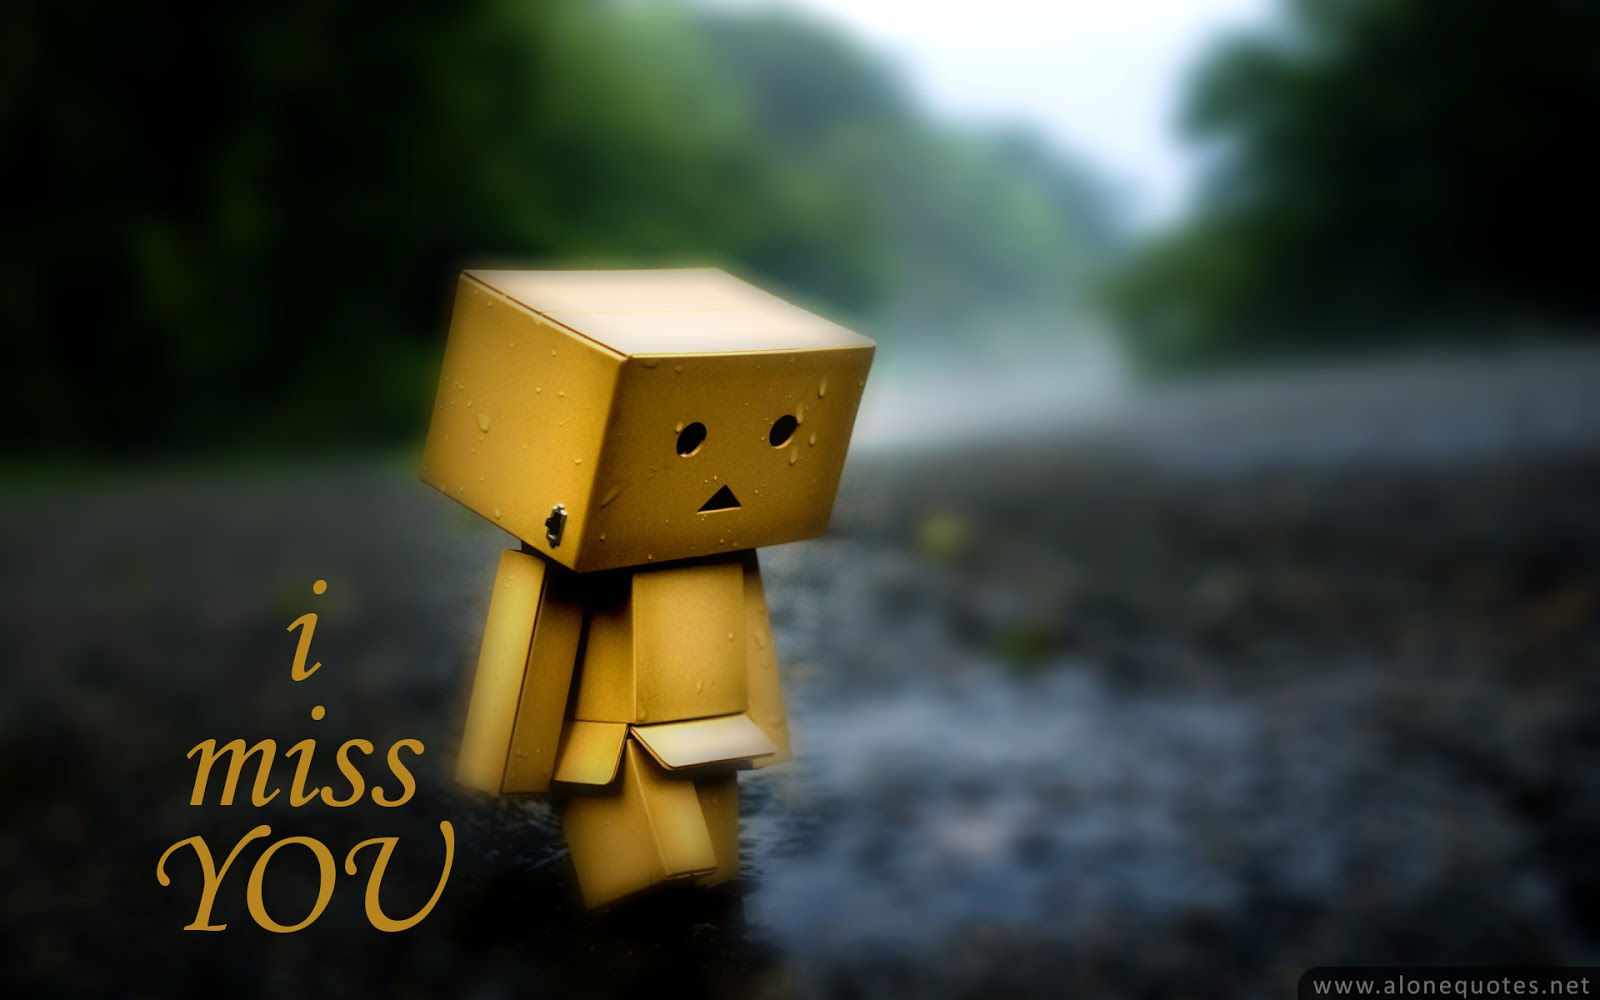 Free download miss you hd wallpapers i miss you high quality ...